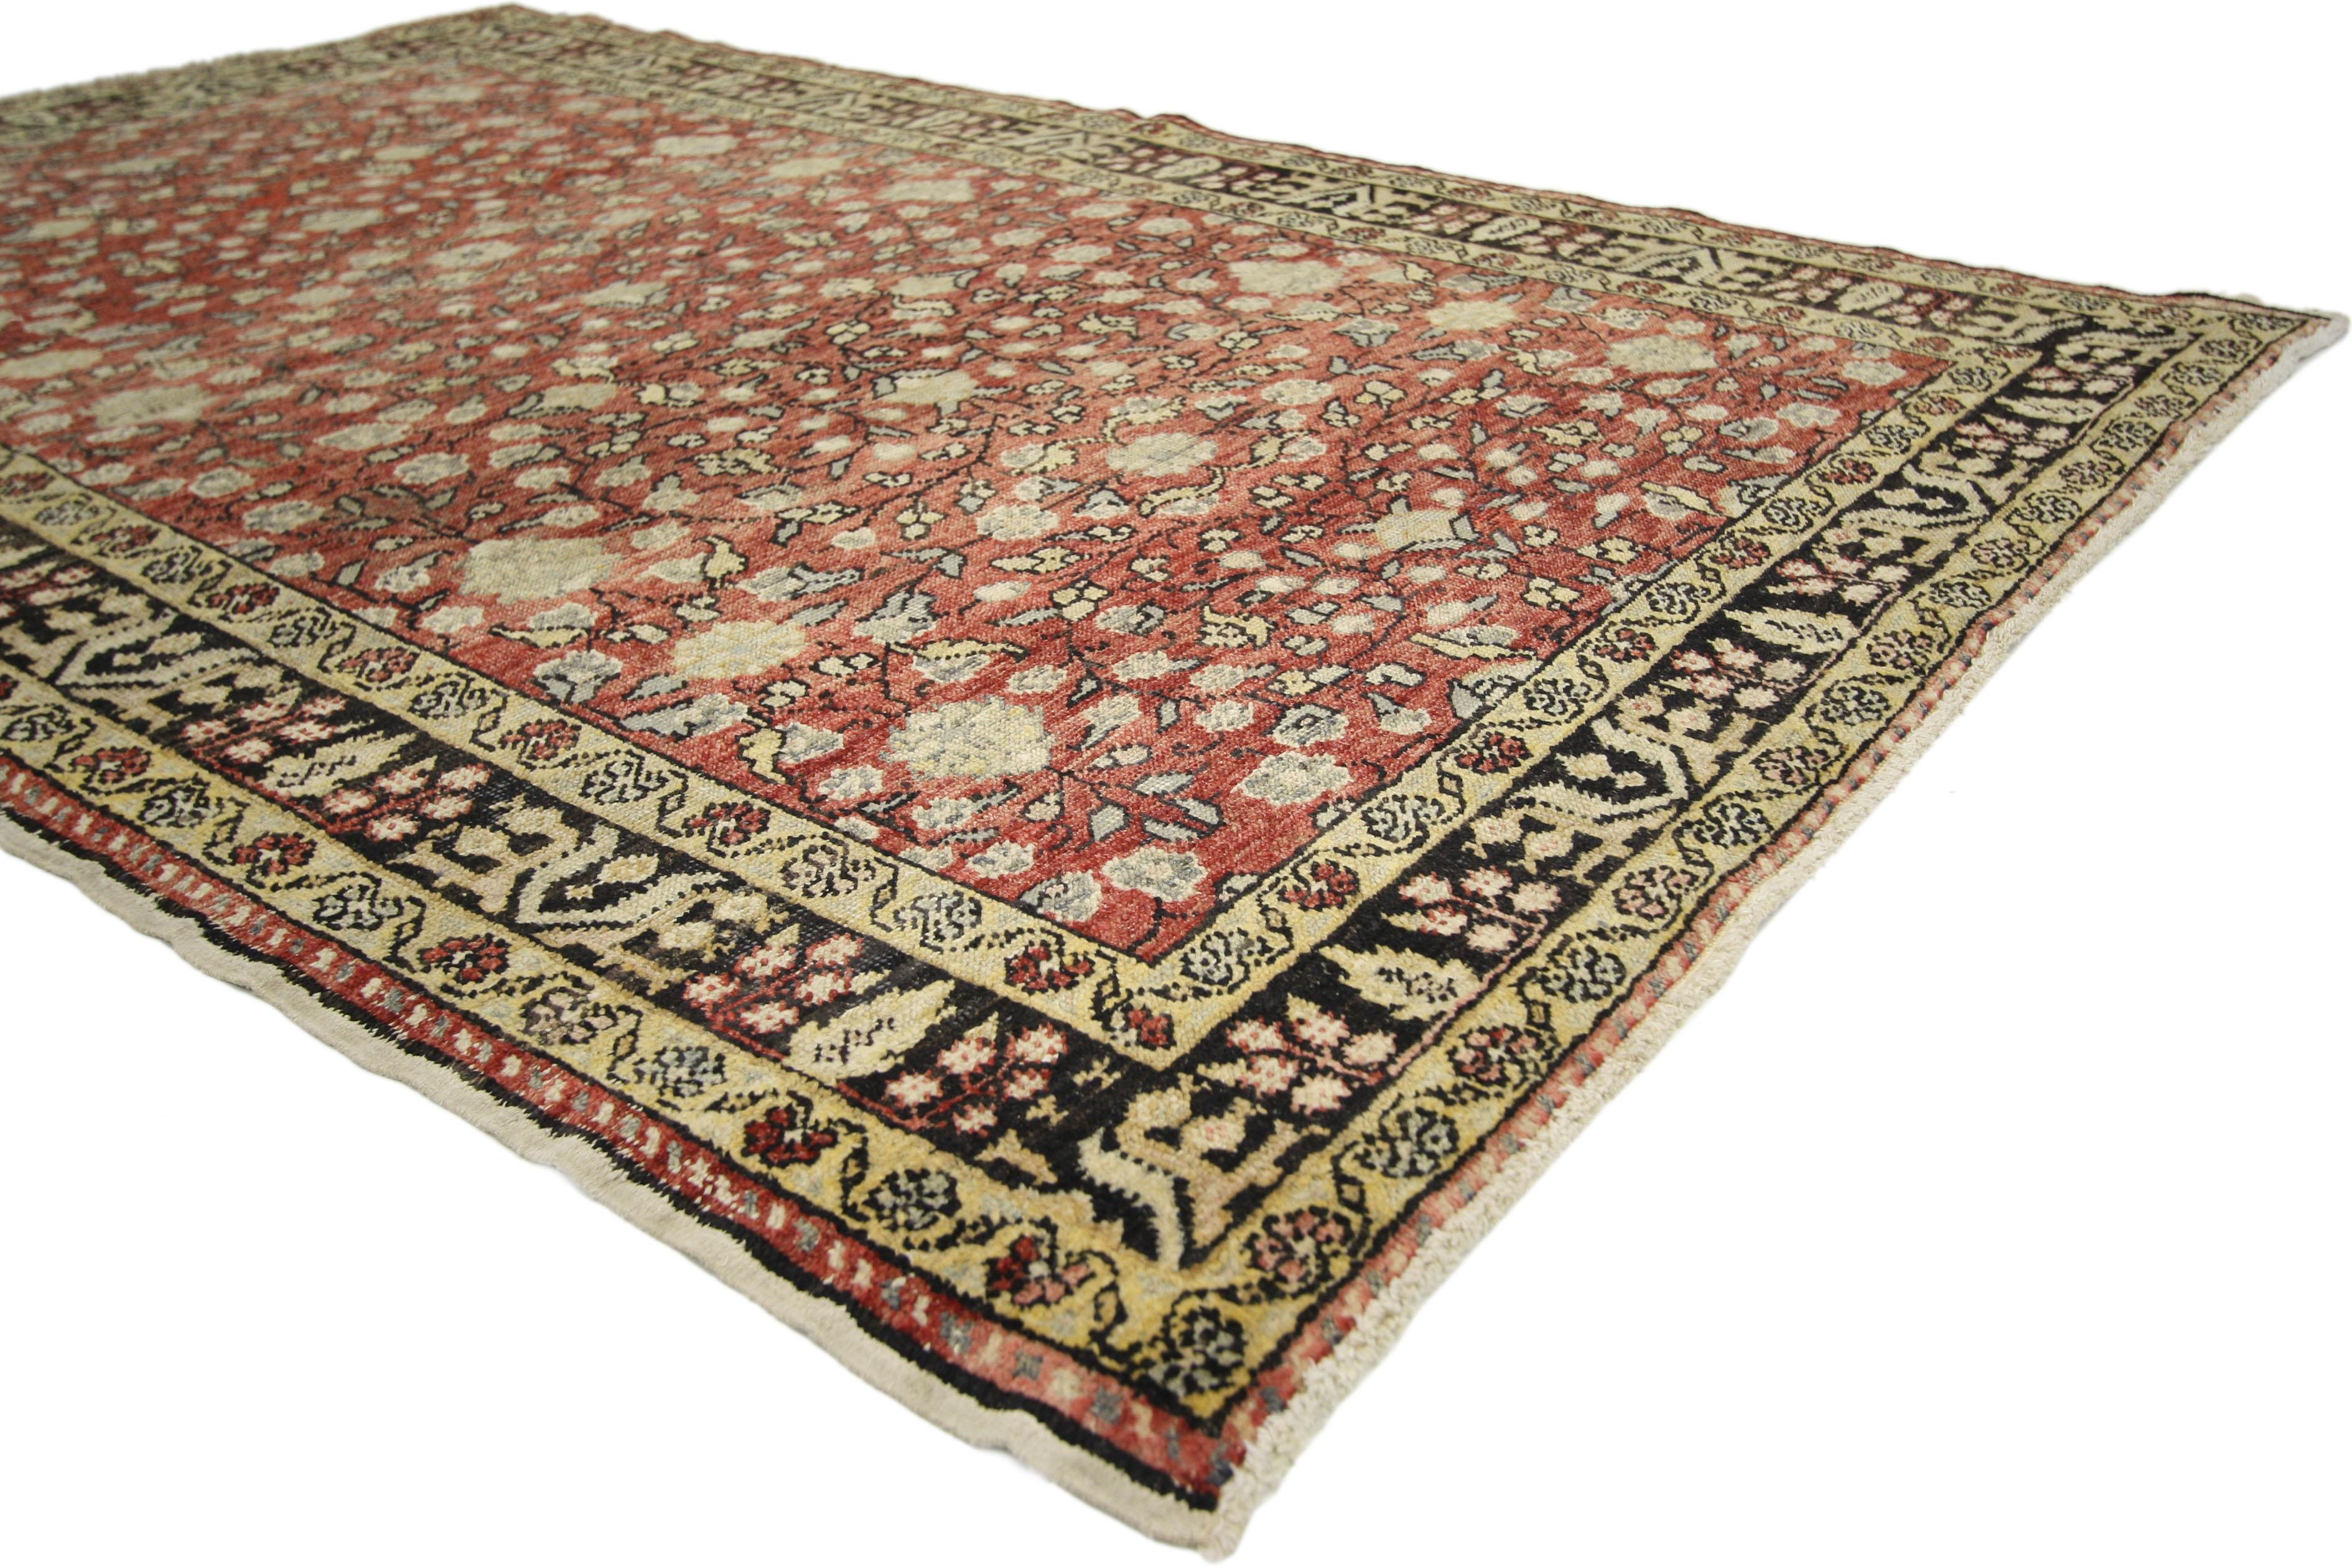 50334 distressed vintage Turkish Sivas rug with Rustic Art Nouveau and shabby chic style. With architectural elements of curved arabesque forms and decorative detailing, this hand knotted wool distressed vintage Turkish Sivas rug features an